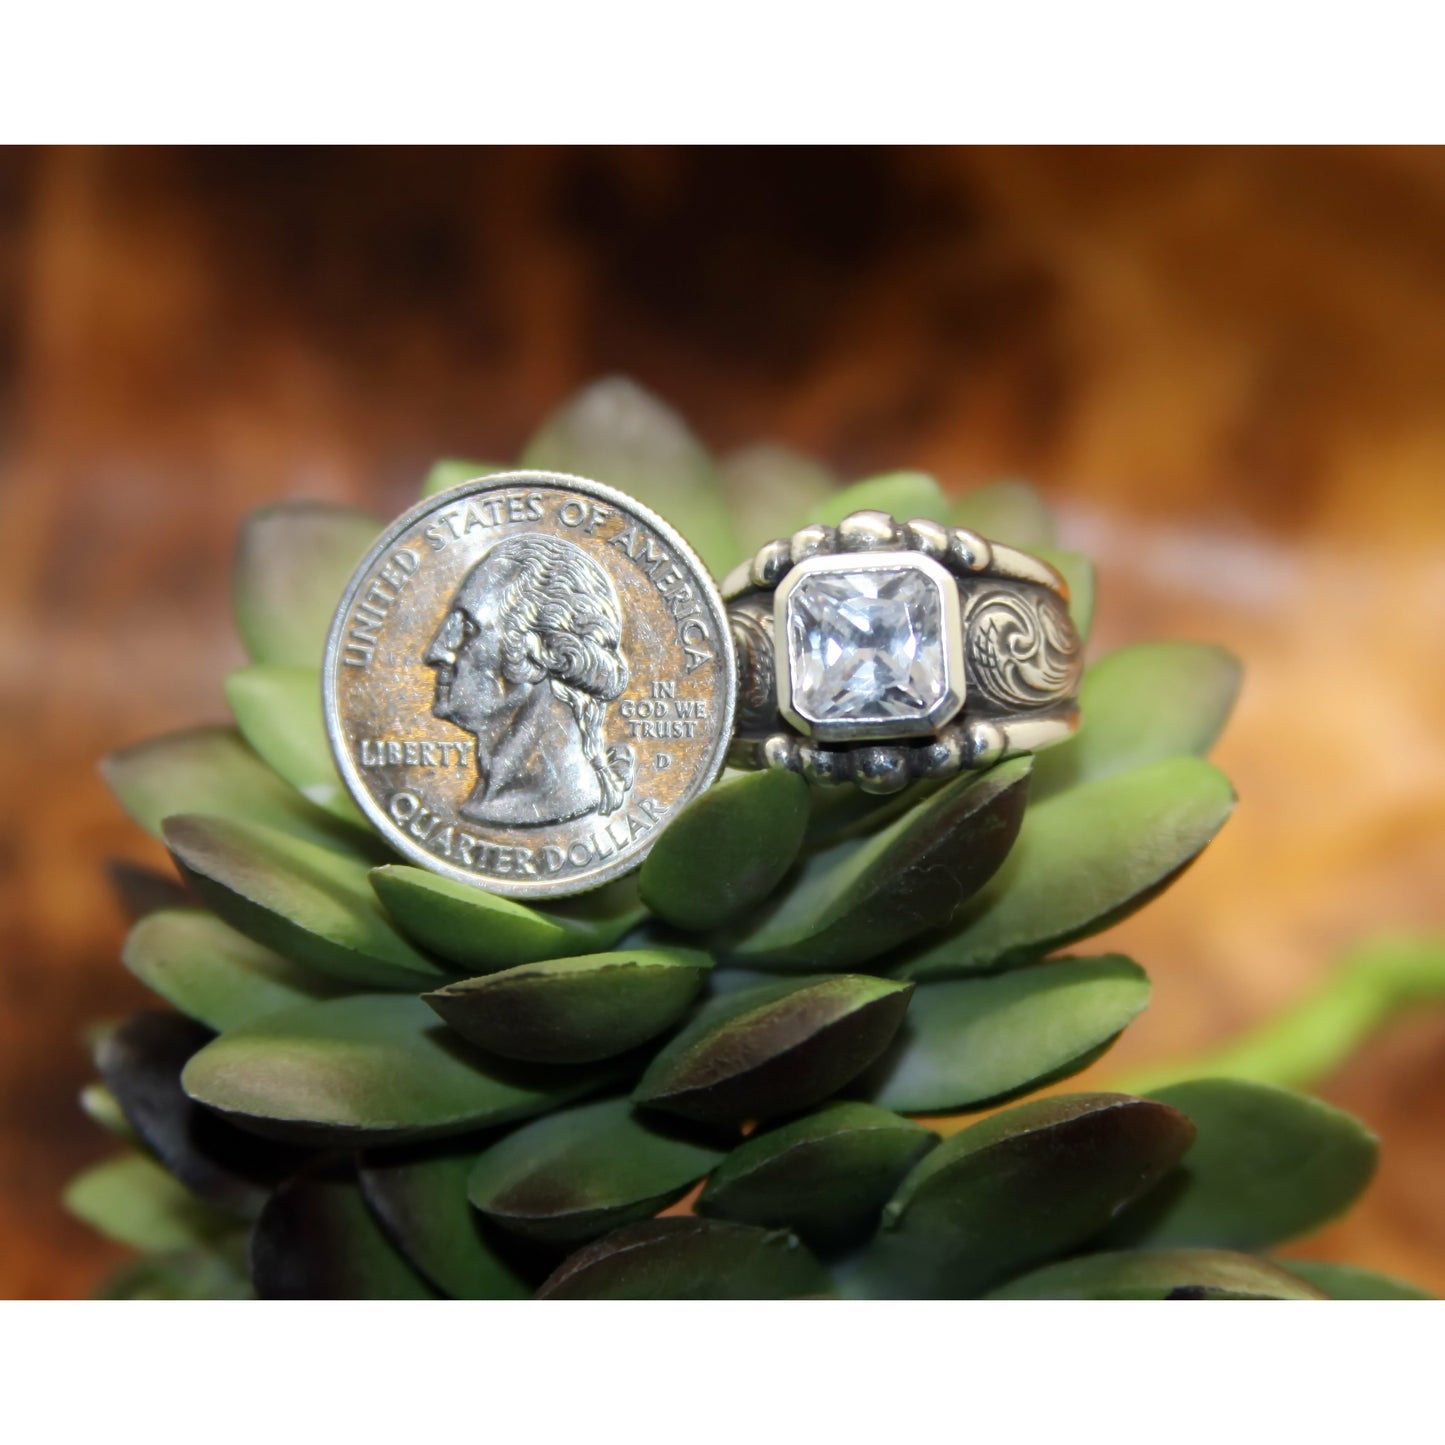 "Jessie" is a handmade solid sterling silver ring with an 8 mm cut corner cubic zirconia bezel set in a low-profile setting. This ring features western hand engraved scrolling on each side of the ring.